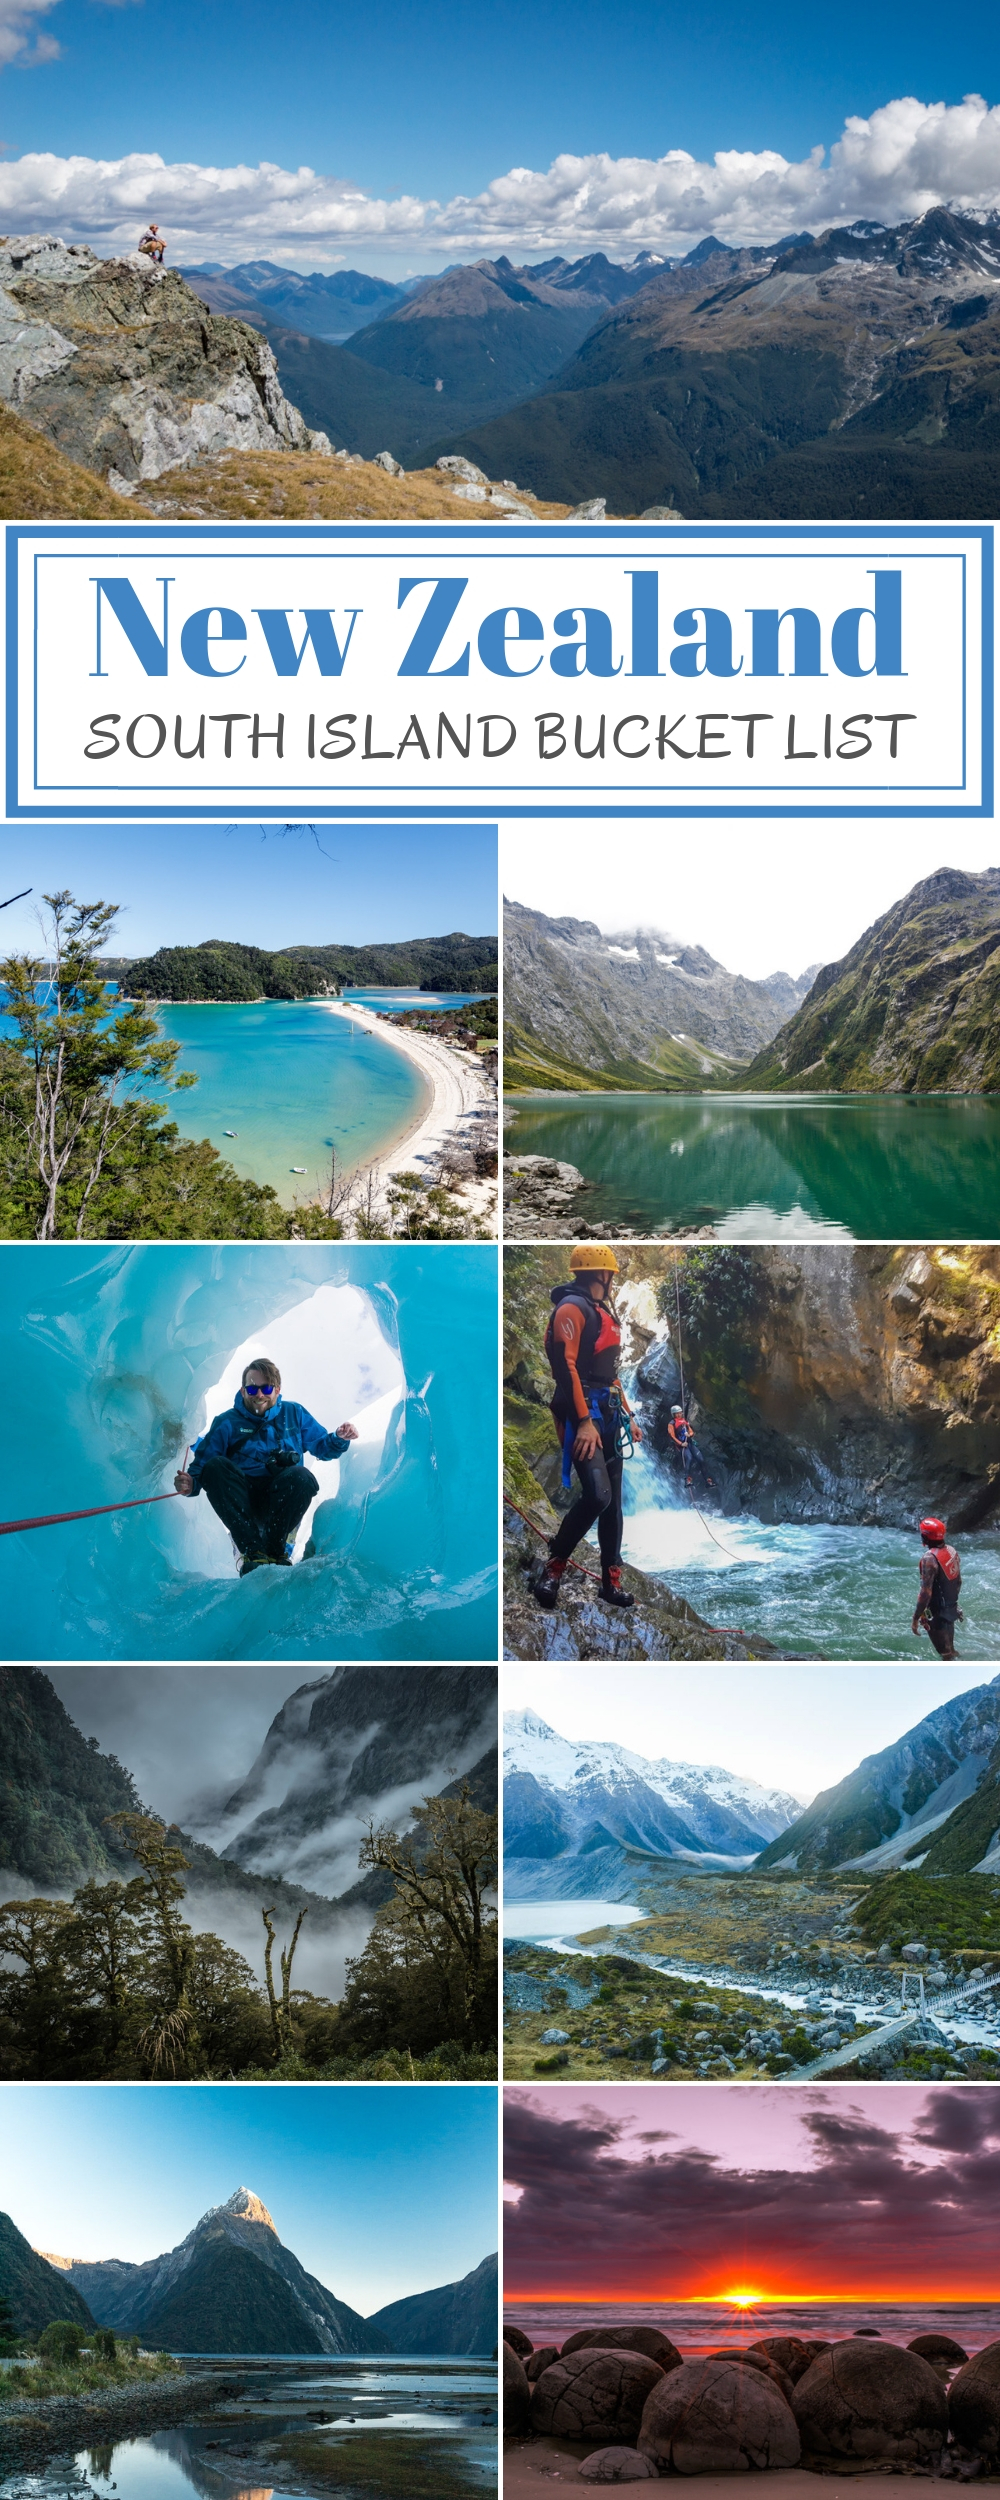 New Zealand South Island Bucket List: Top Things to See and Do